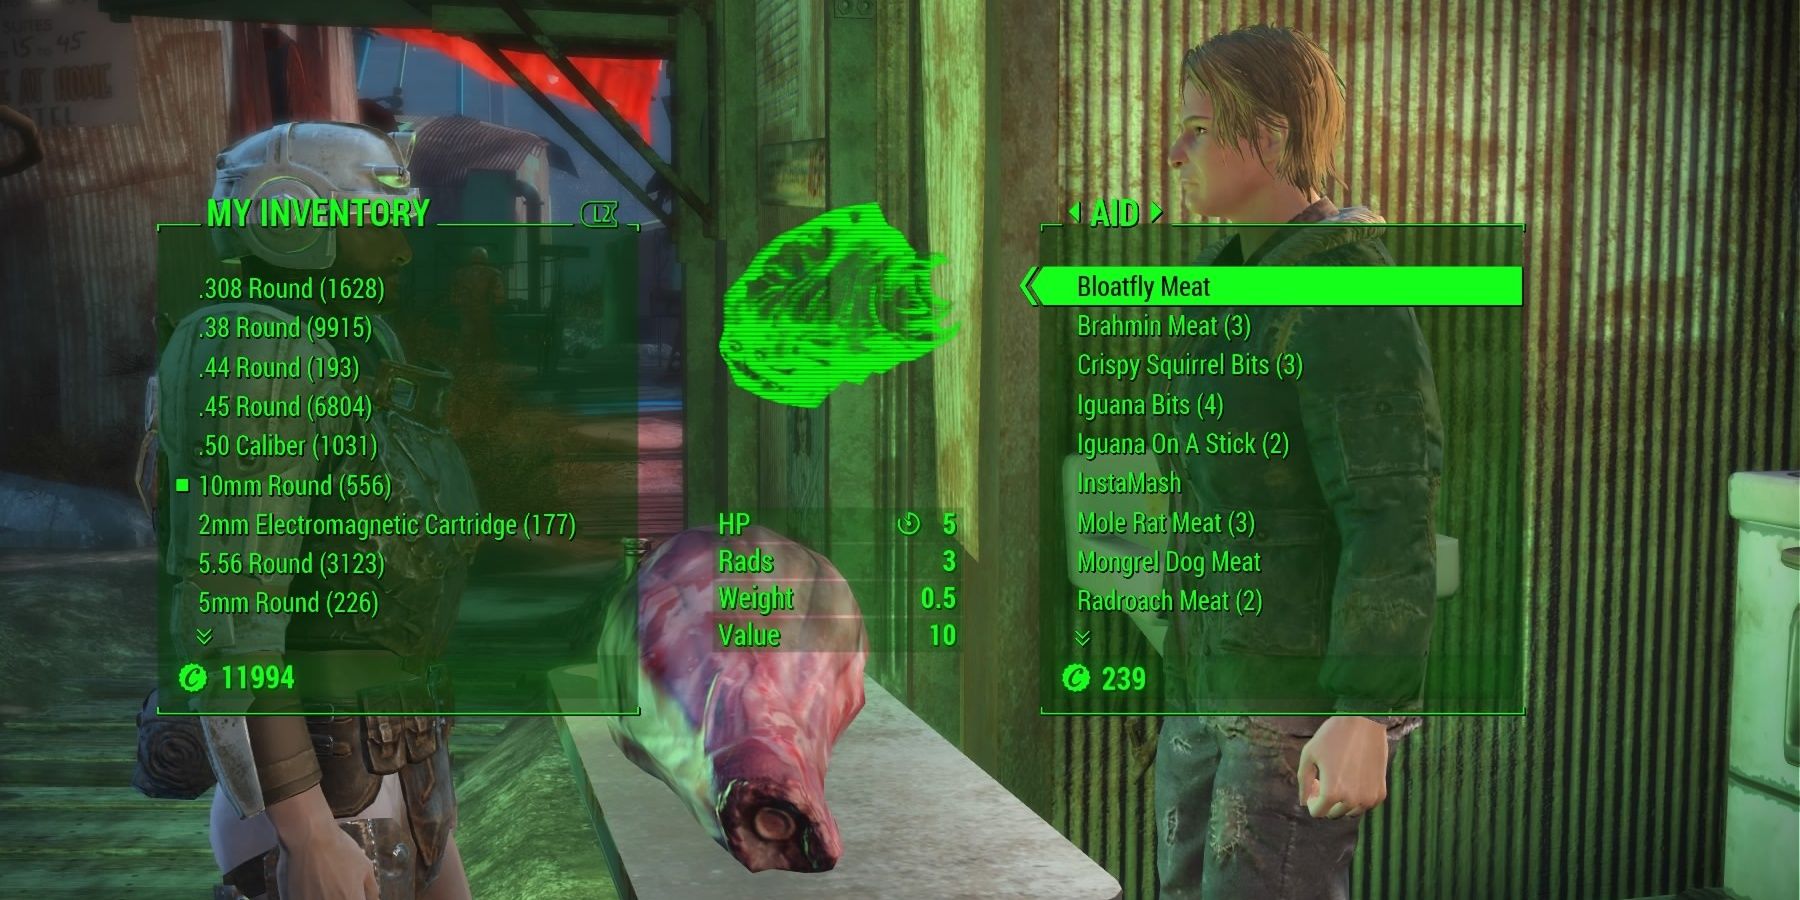 Food Purchase in Fallout 4